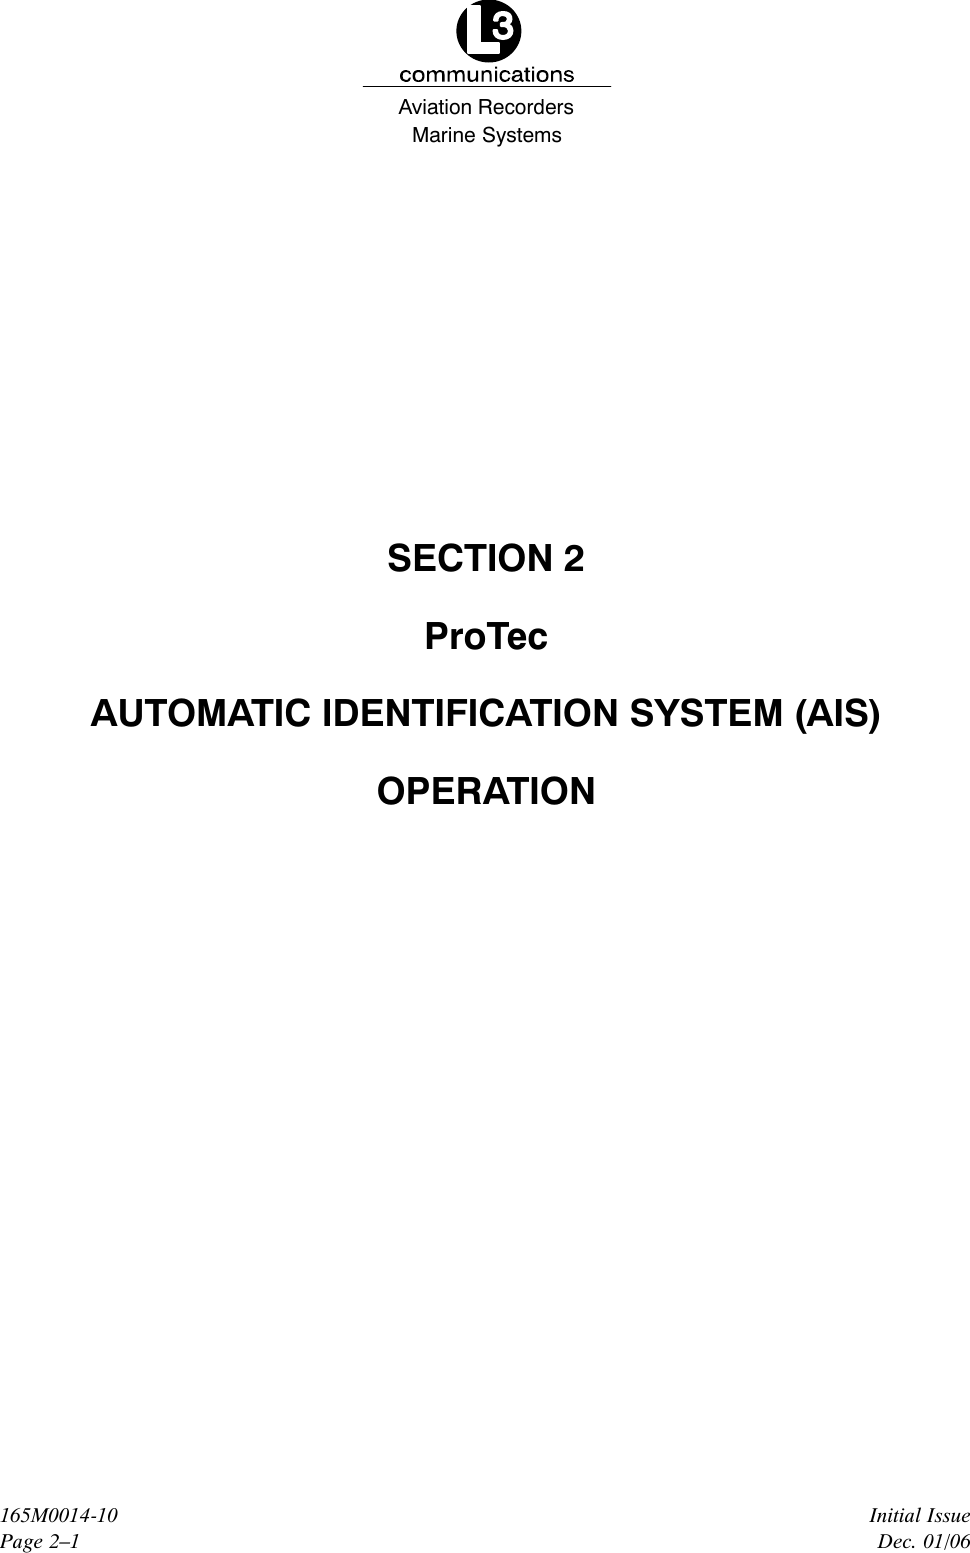 Marine SystemsAviation RecordersInitial IssueDec. 01/06165M0014-10Page 2–1SECTION 2ProTecAUTOMATIC IDENTIFICATION SYSTEM (AIS)OPERATION